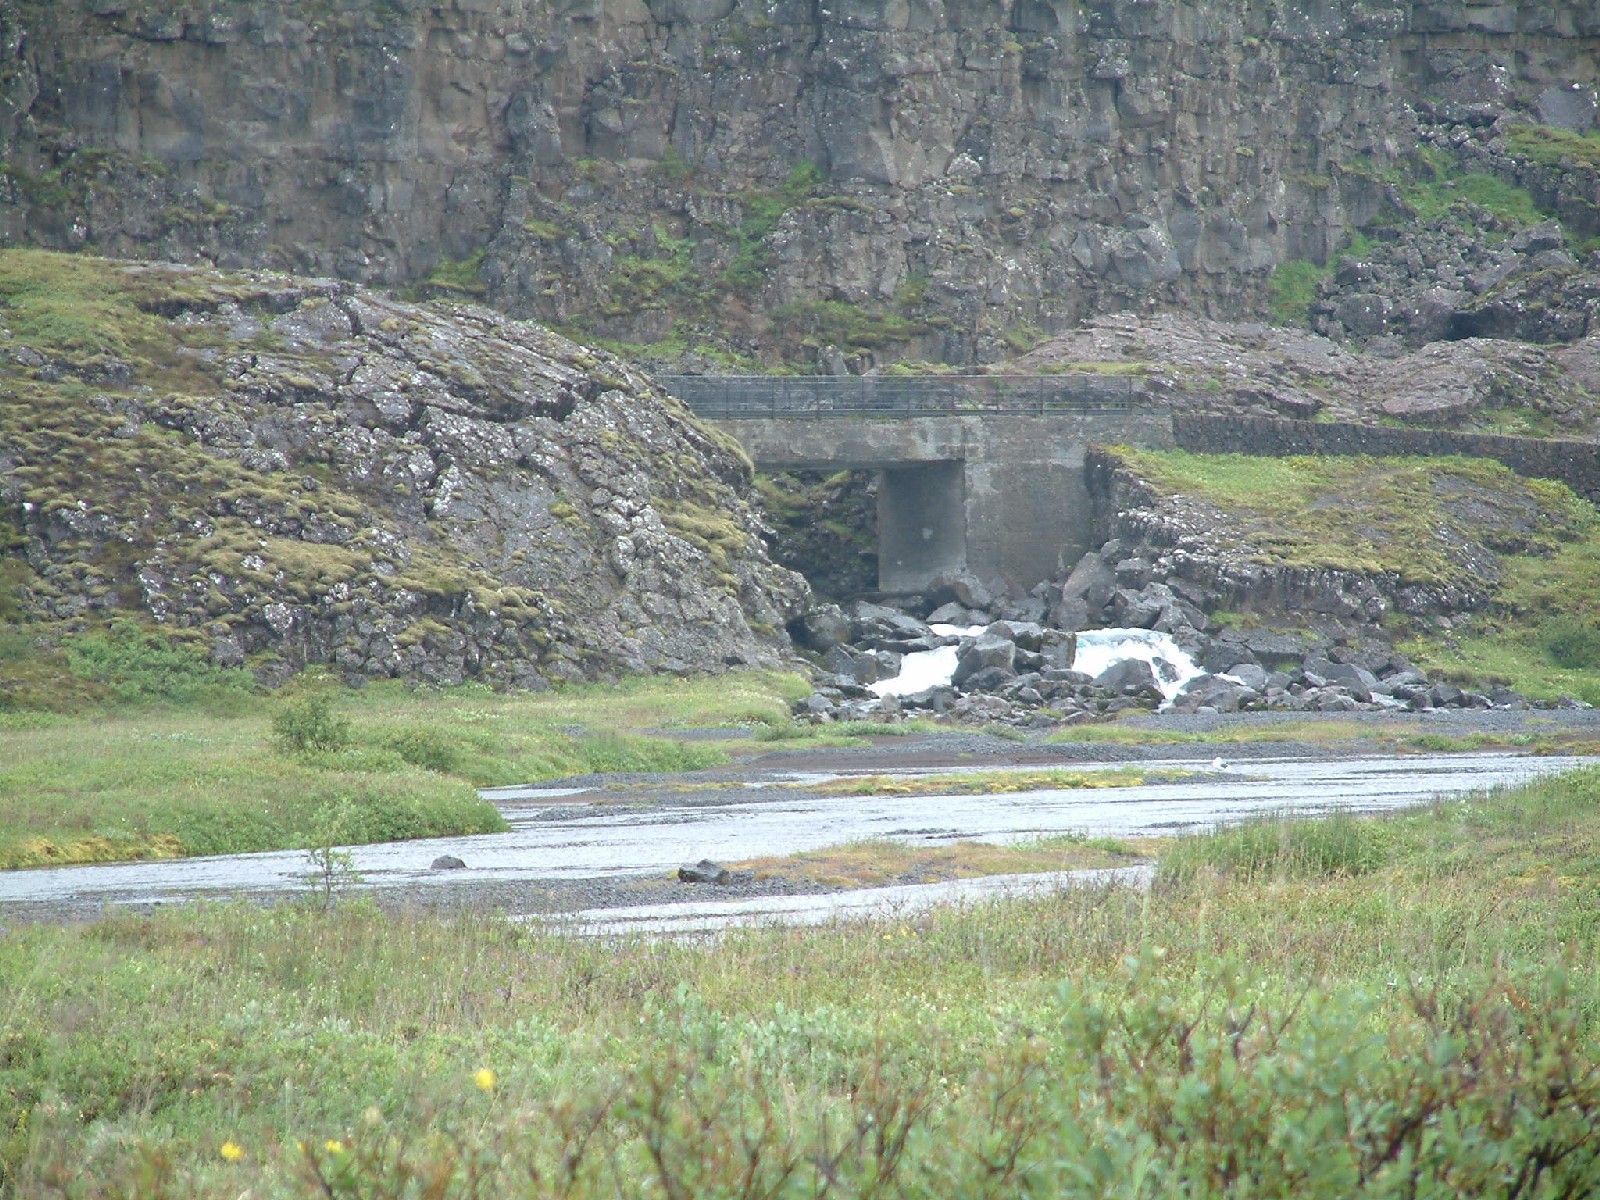 ingvellir, meeting place of worlds oldest parliament, the Alingi, in 930 AD